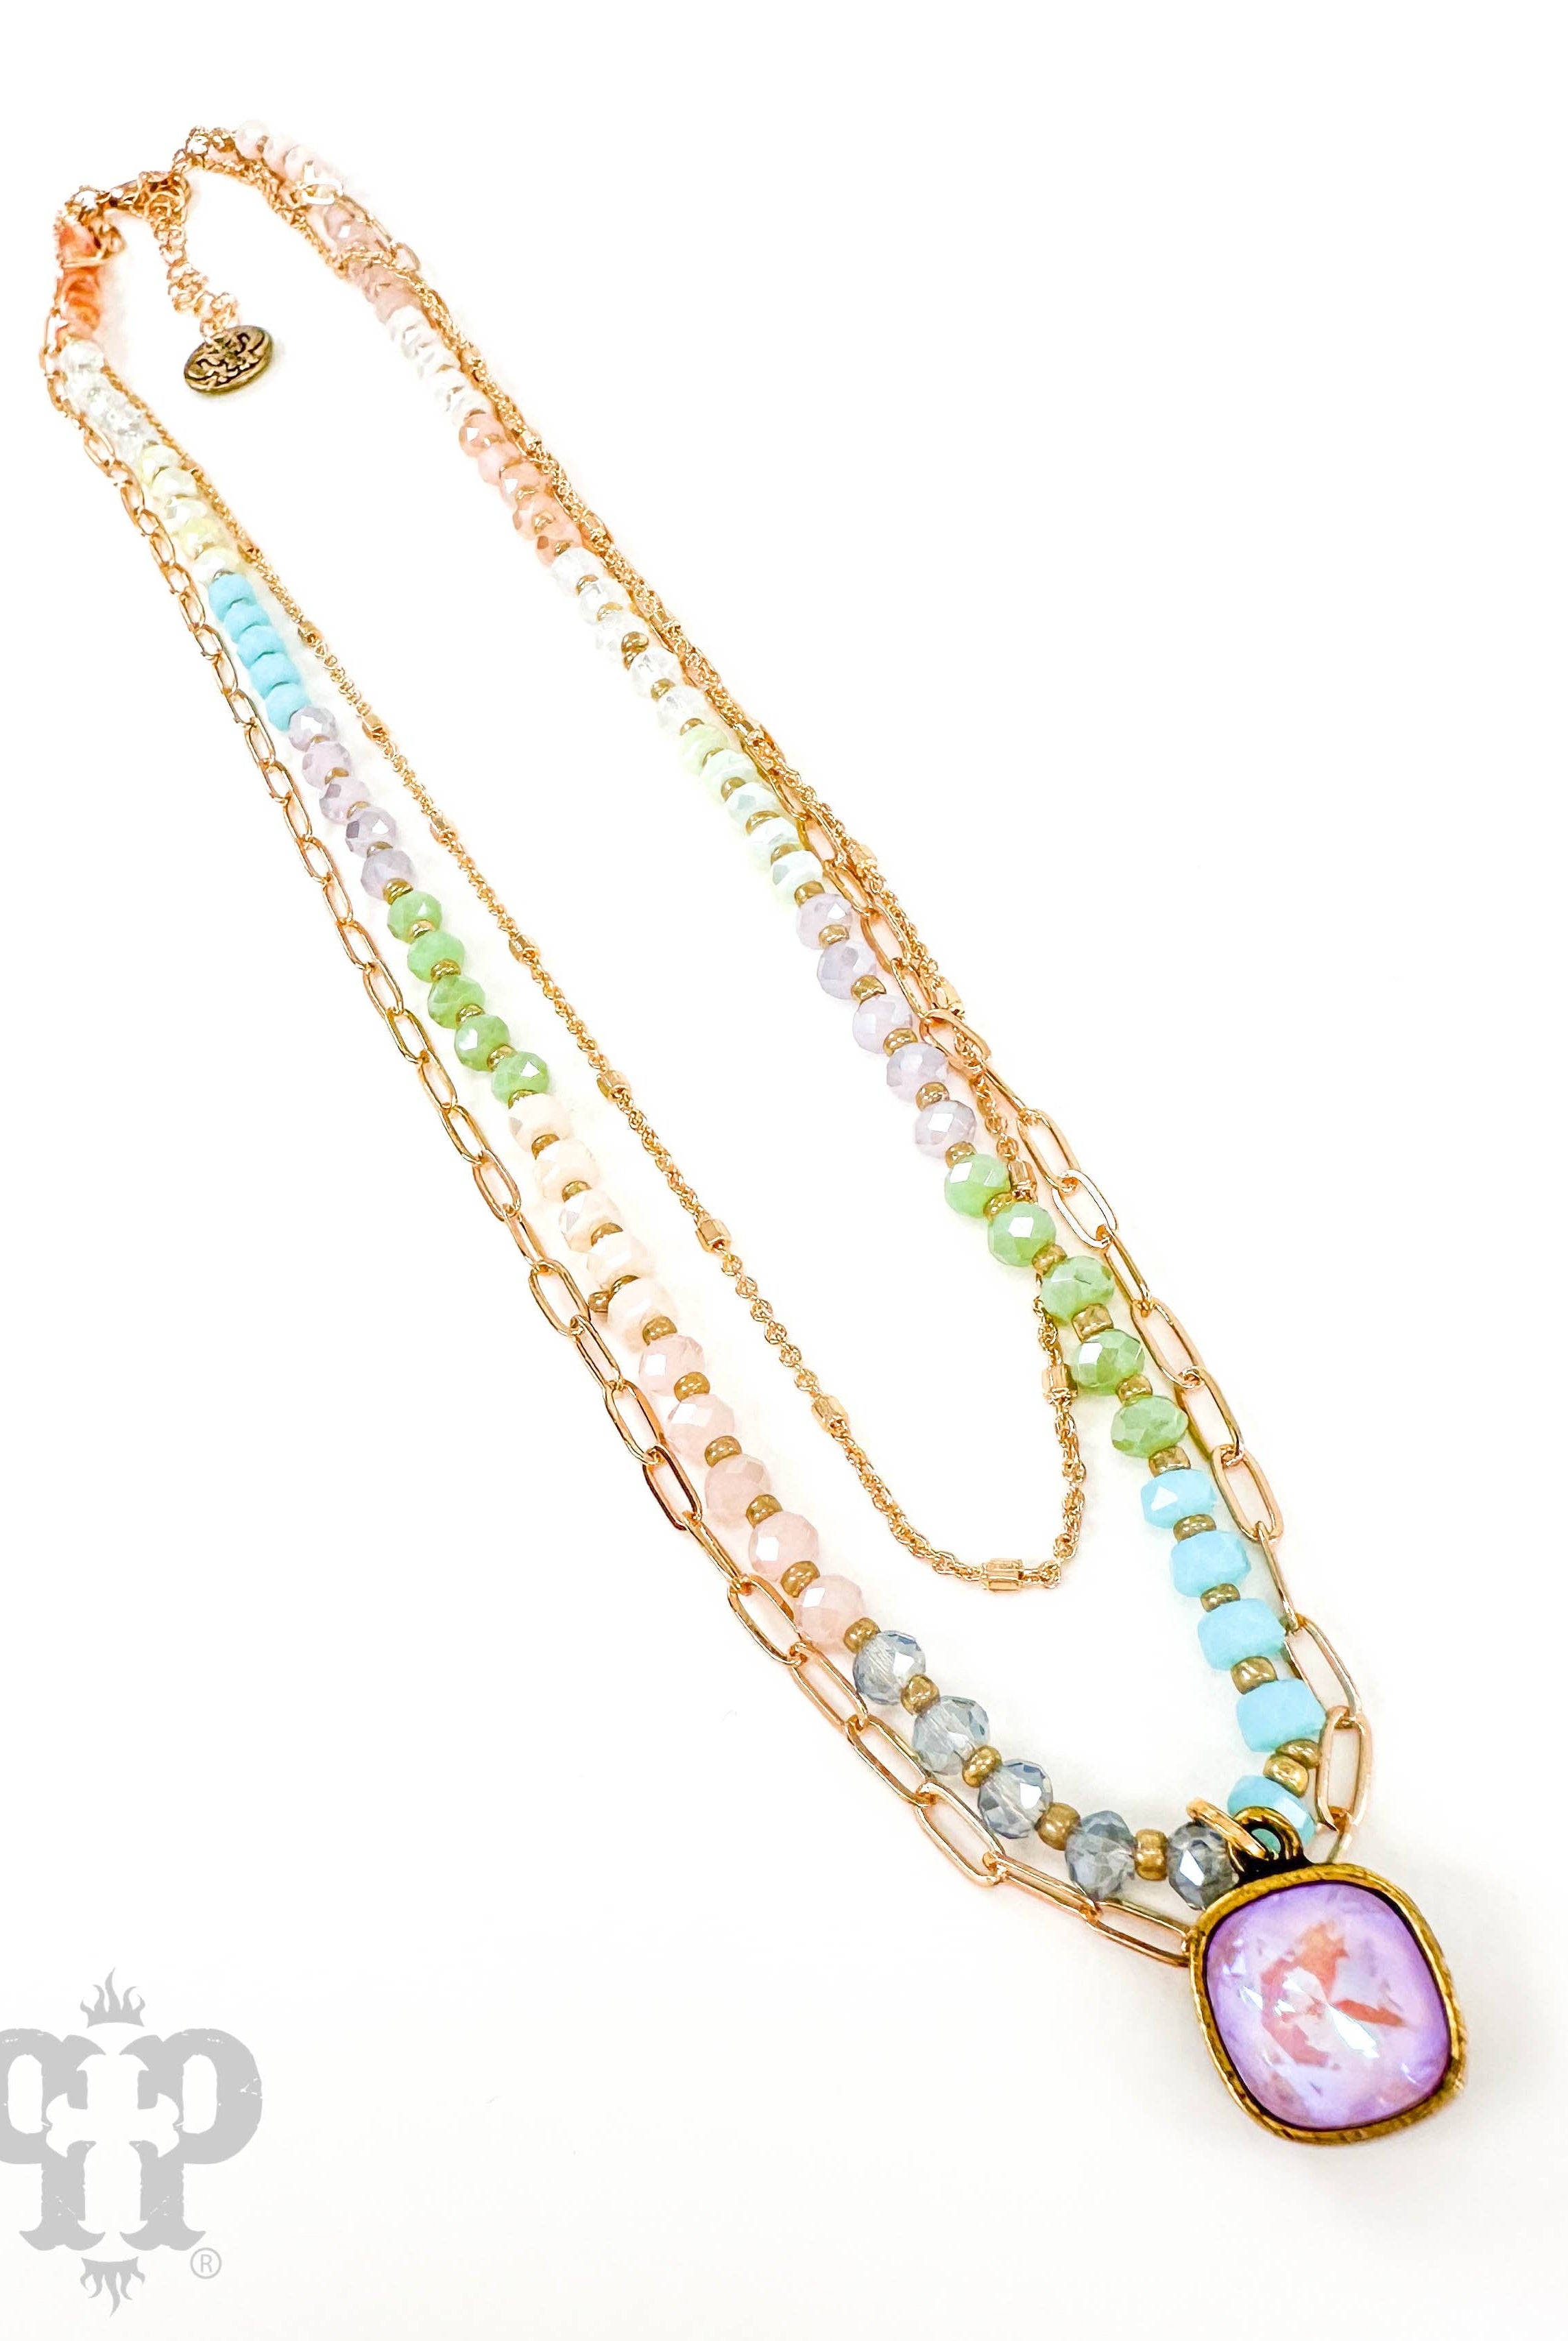 Triple strand necklace with drop | Stuffology Boutique-Necklaces-Pink Panache Brands-Stuffology - Where Vintage Meets Modern, A Boutique for Real Women in Crosbyton, TX